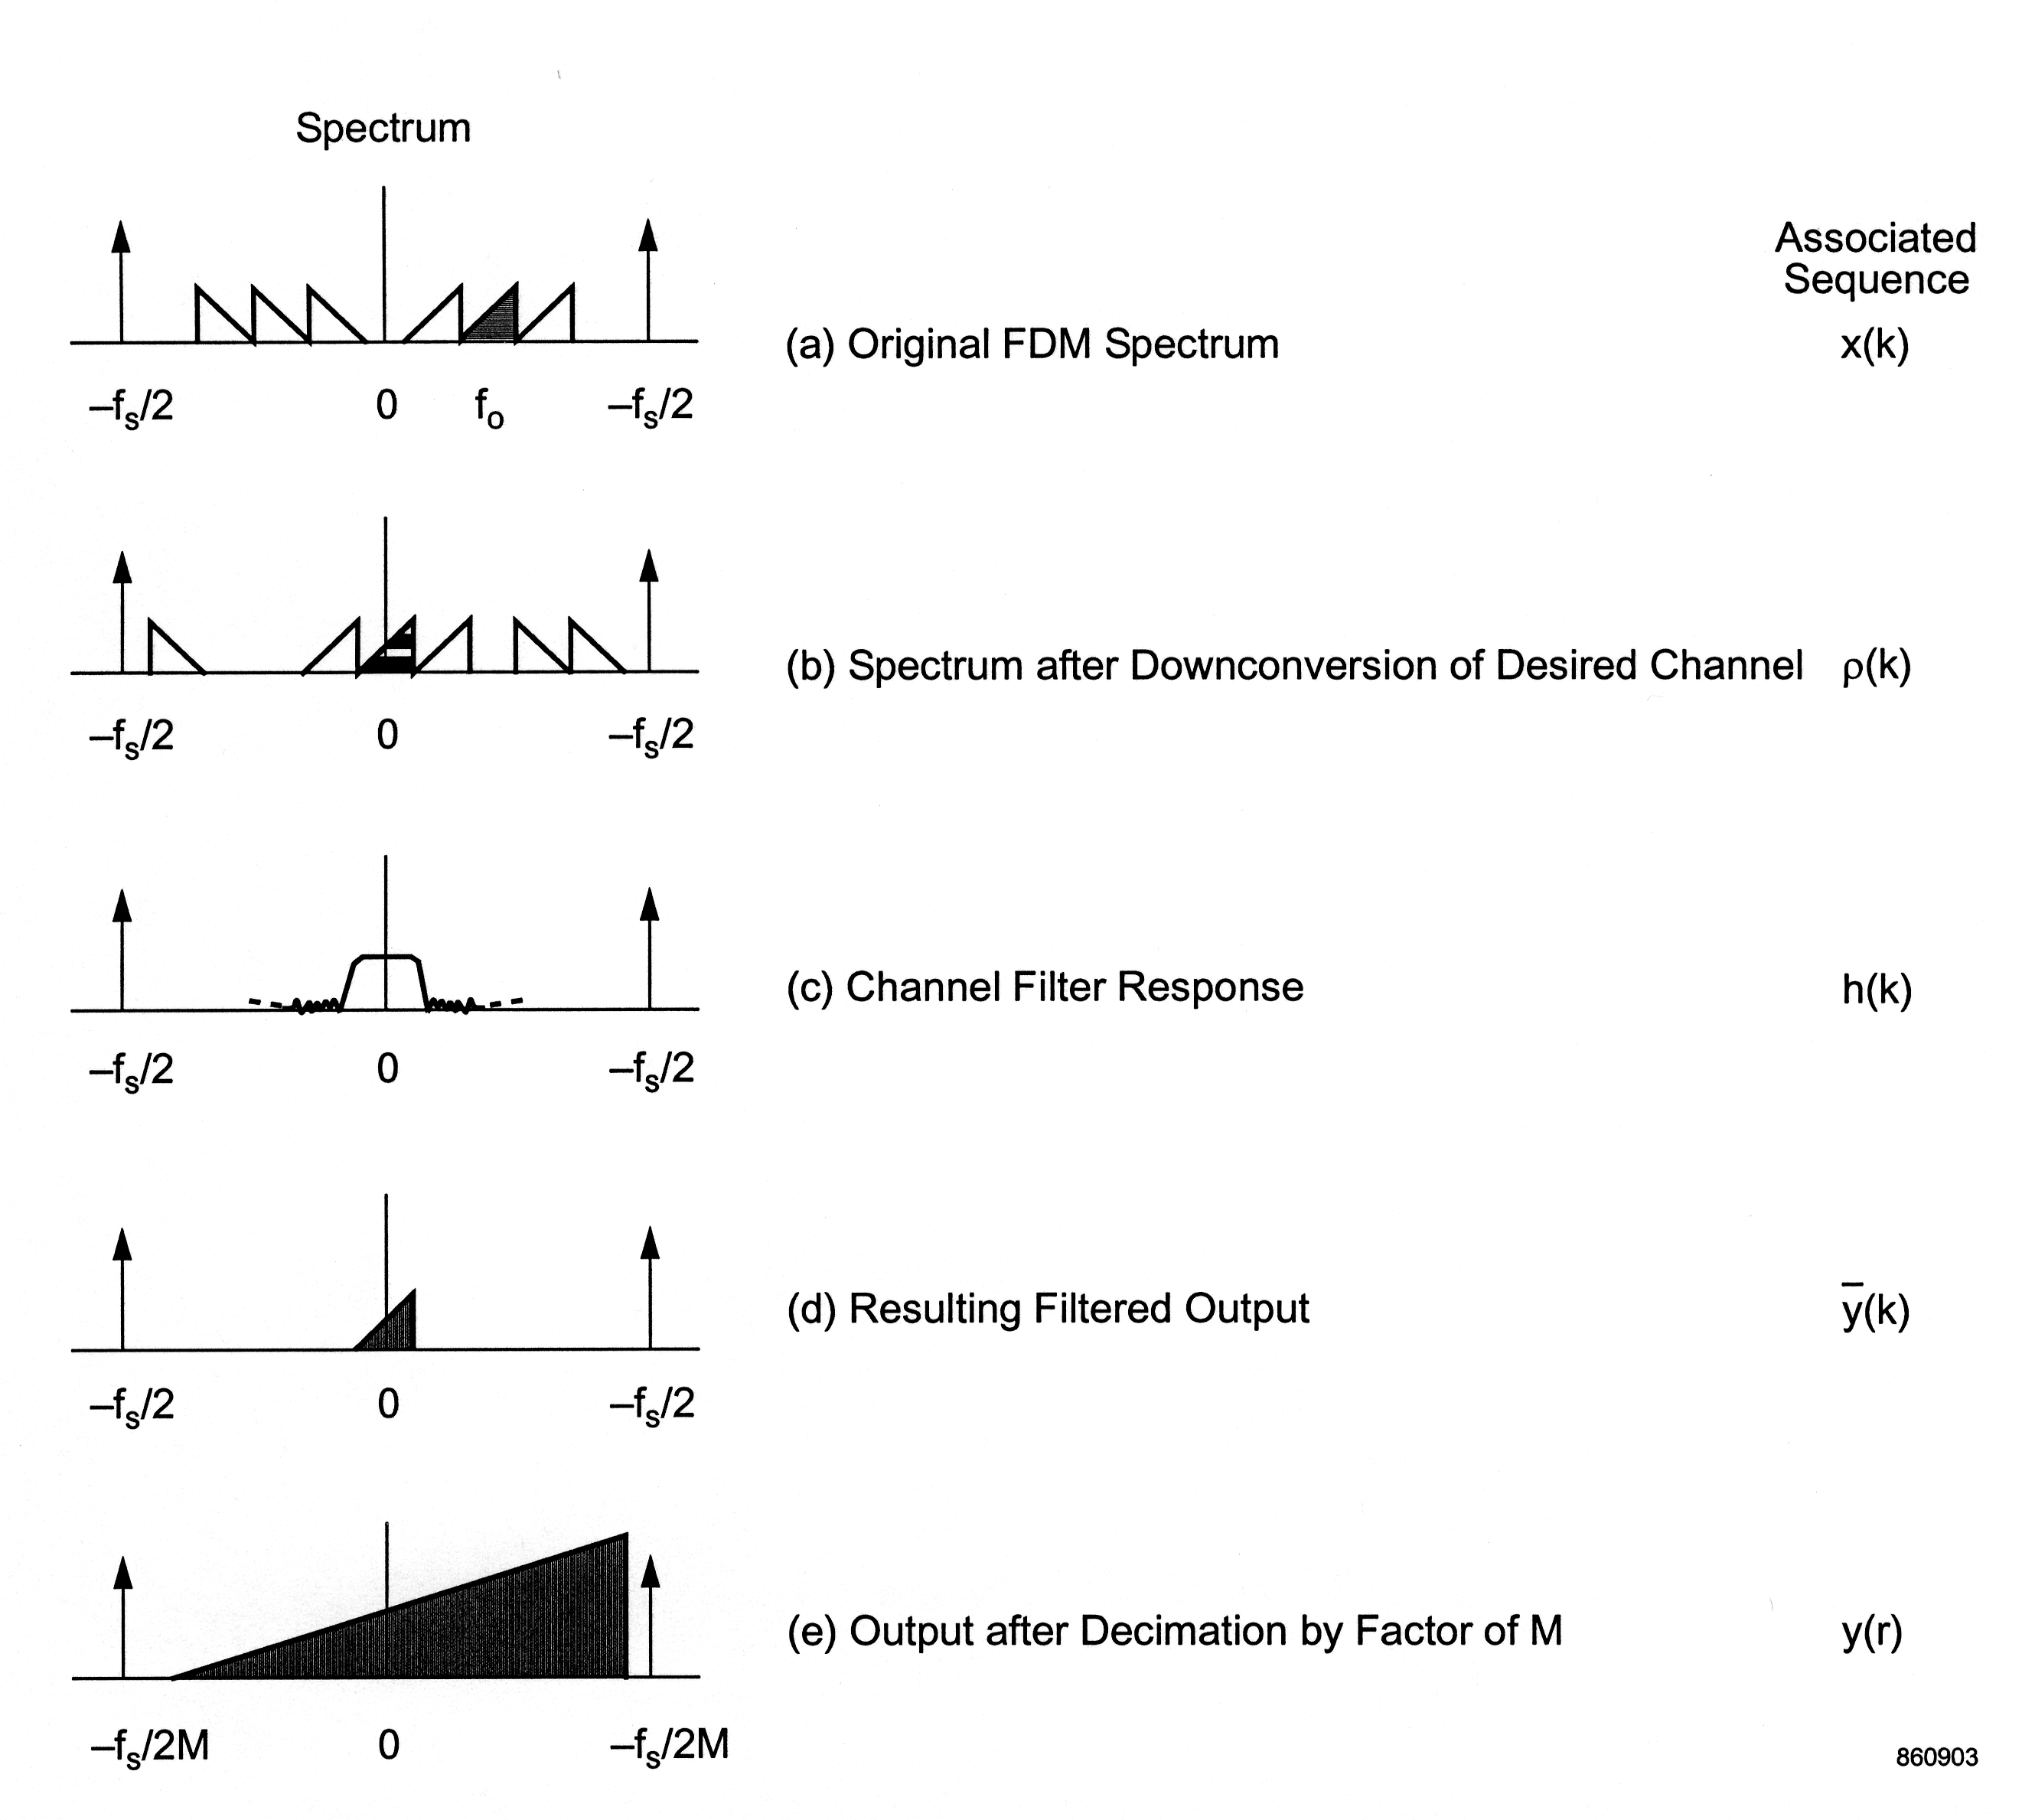 Figure two is a five-part diagram of graphs with descriptions. Each graph plots f_0 on the horizontal axis, only displaying the first and second quadrants, and the horizontal axis ranges in value from -f_s/2 to f_s/2. The first graph, titled (a) Original FDM Spectrum, and described as the associated sequence x(k), is a graph of six congruent right triangles with bases on the horizontal axis. Three right triangles in the second quadrant face the center of the graph with their right angles on the left. Three right triangles in the first quadrant face the center of the graph with their right angles on the right. The center triangle in the first quadrant is shaded black. The second graph, titled (b) Spectrum after Downconversion of Desired Channel, and described as the associated sequence ρ(k), is a graph of six congruent right triangles with bases on the horizontal axis, but unlike (a), they are scattered in a less symmetric pattern. Far on the left is the first right triangle, with its right angle on the left. Just before, just after, and on the vertical axis are the next three triangles, all facing to the right with their right angles on the right side. The center triangle in this series is shaded black. A final two triangles further to the right in the first quadrant face away from the vertical axis with their right angles on the left. The third graph, titled (c) Channel Filter response, and described as the associated sequence h(k), contains a short wavering graph with a flat peak centered on the vertical axis. The fourth graph, titled (d) Resulting Filtered Output, and described  as the associated sequence y-bar(k), contains one small black right triangle centered at the origin with its right angle on the right side. The fifth graph, titled (e) Output after Decimation by Factor of M, and described as the associated sequence y(r), contains a large shaded right triangle with a base approximately twice as long as its height, with its base centered in the graph at the vertical axis.